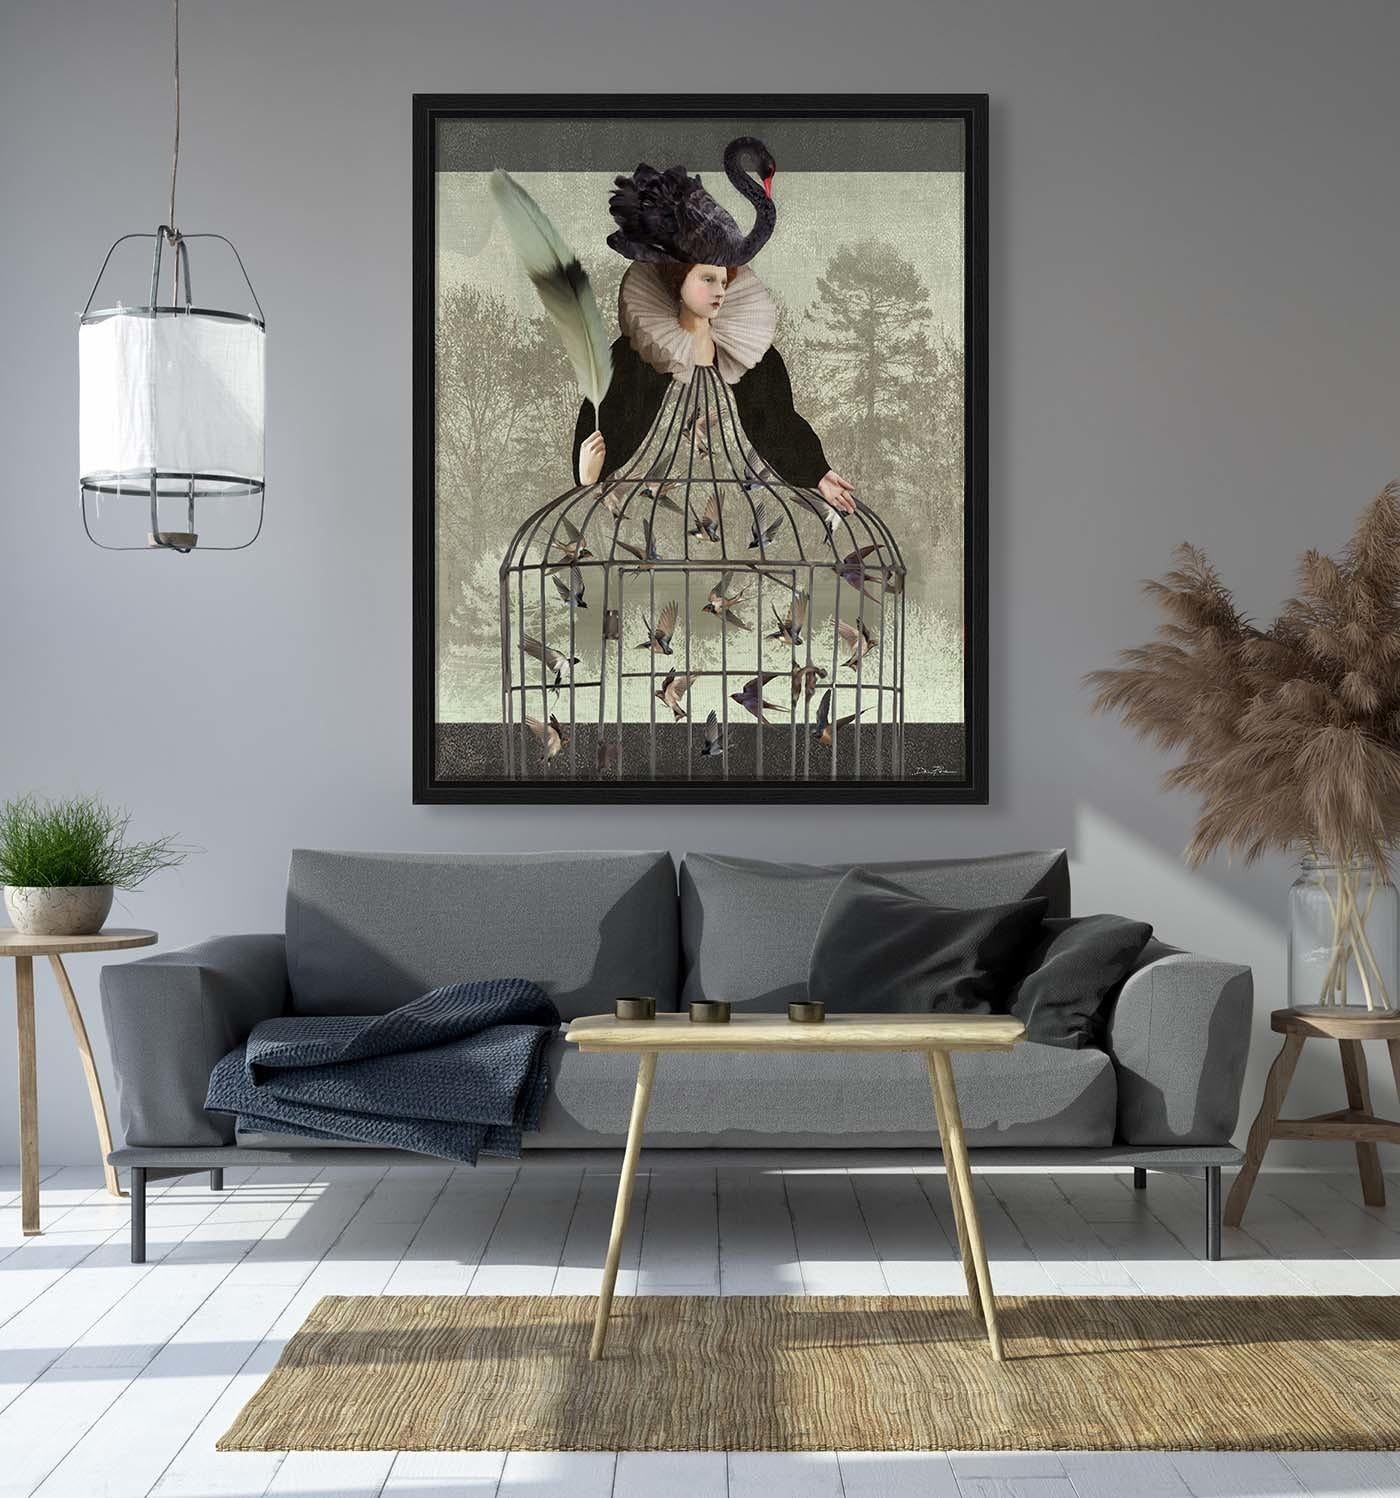 Inspired by 17th century English portraiture, this digital painting portrays female intellectuality. Painted in a pop-surrealist manner, it depicts a woman whose body is in the shape of a cage, which is imprisoning a group of fluttering swallows. An